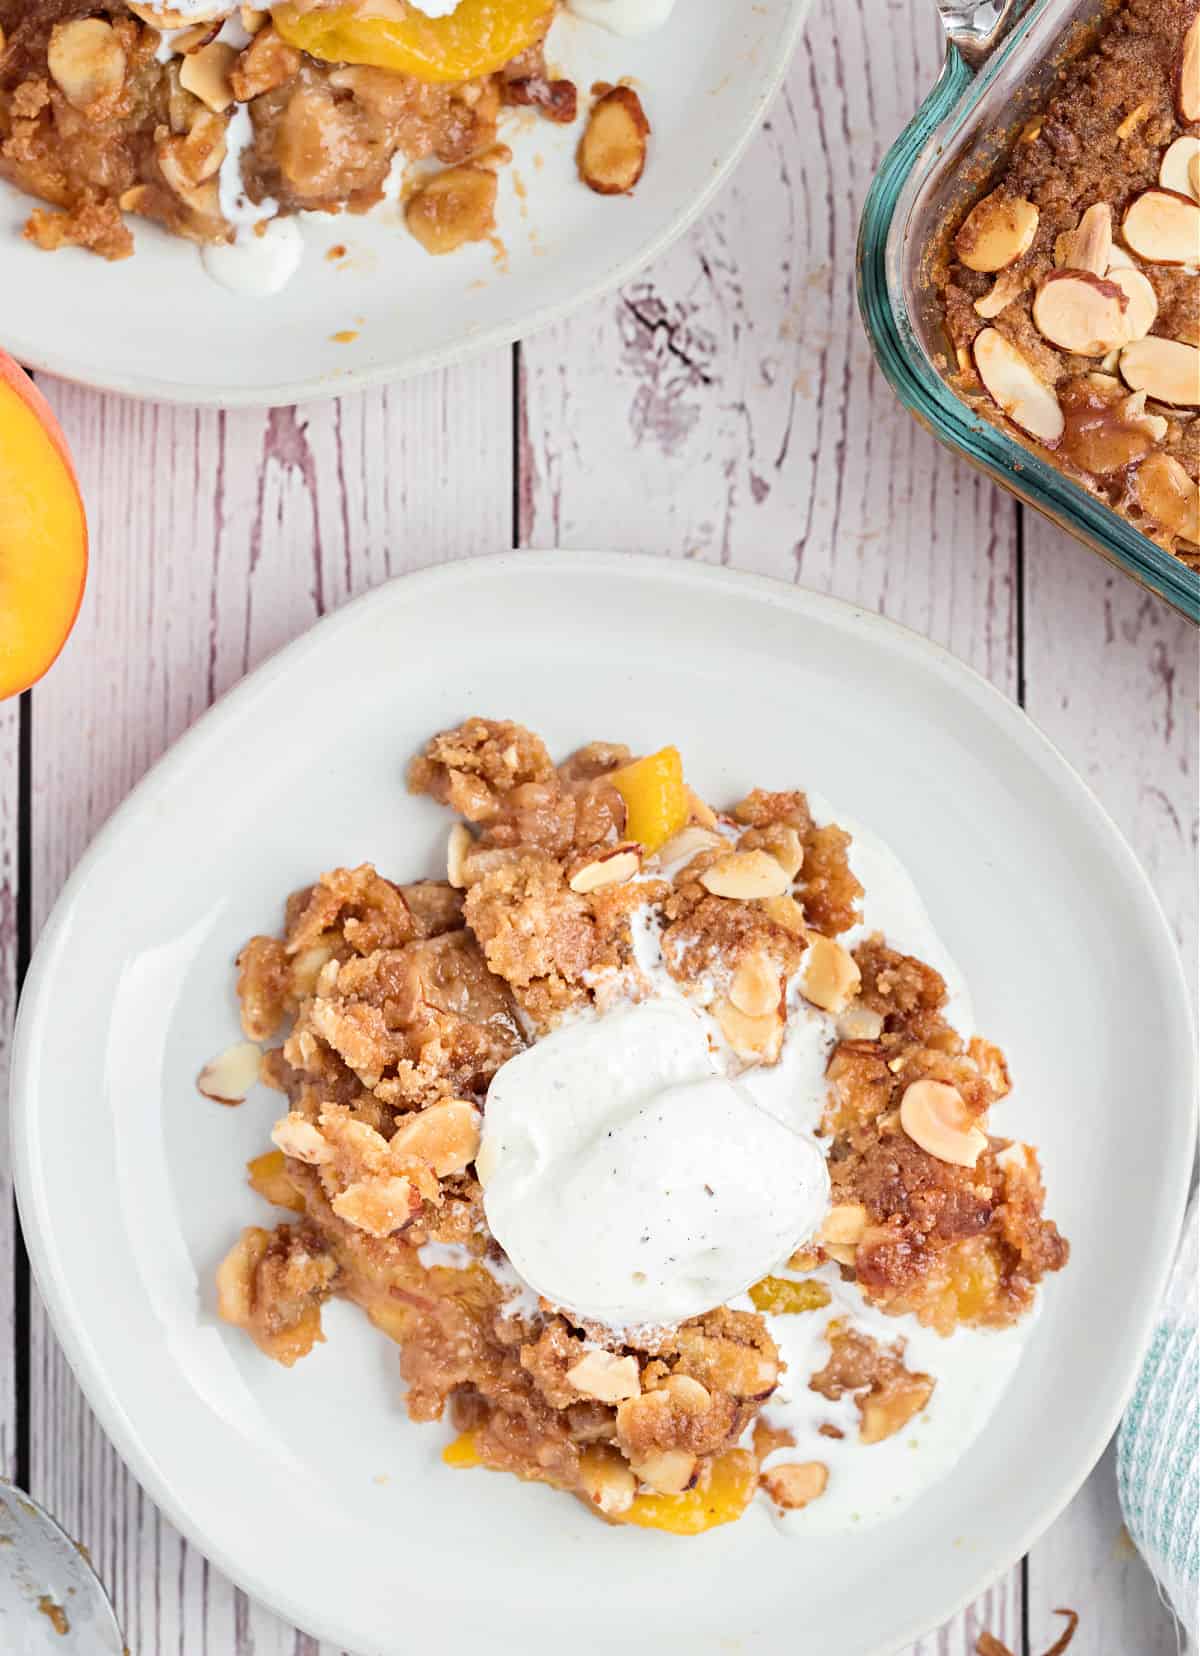 Peach crisp on a plate with melted vanilla ice cream on top.